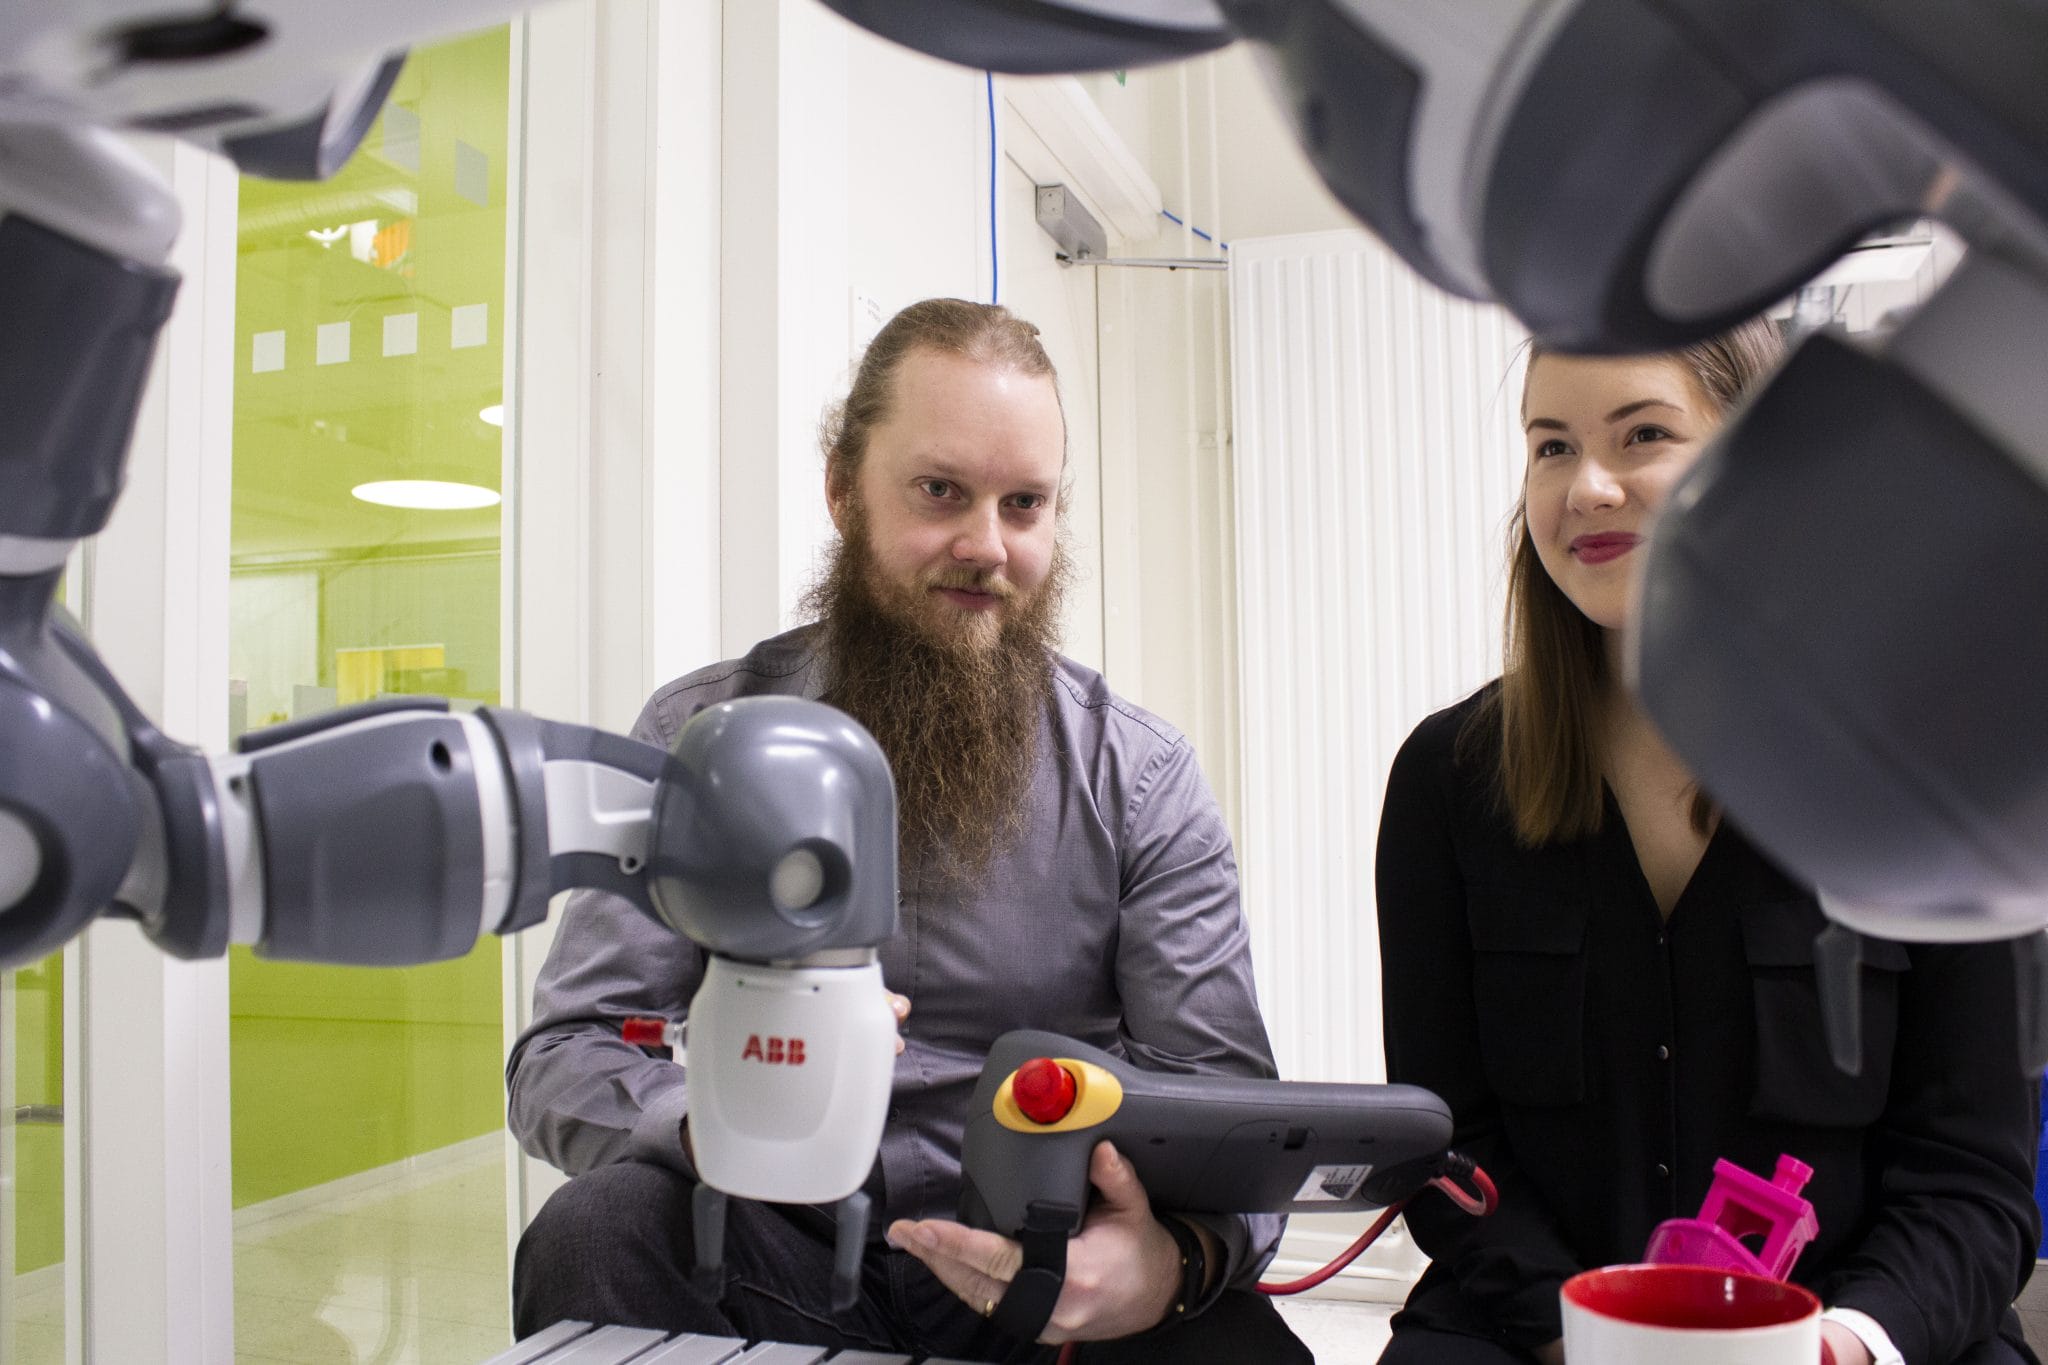 Students working with Yumi-robot at SAMK-campus Pori automation lab.